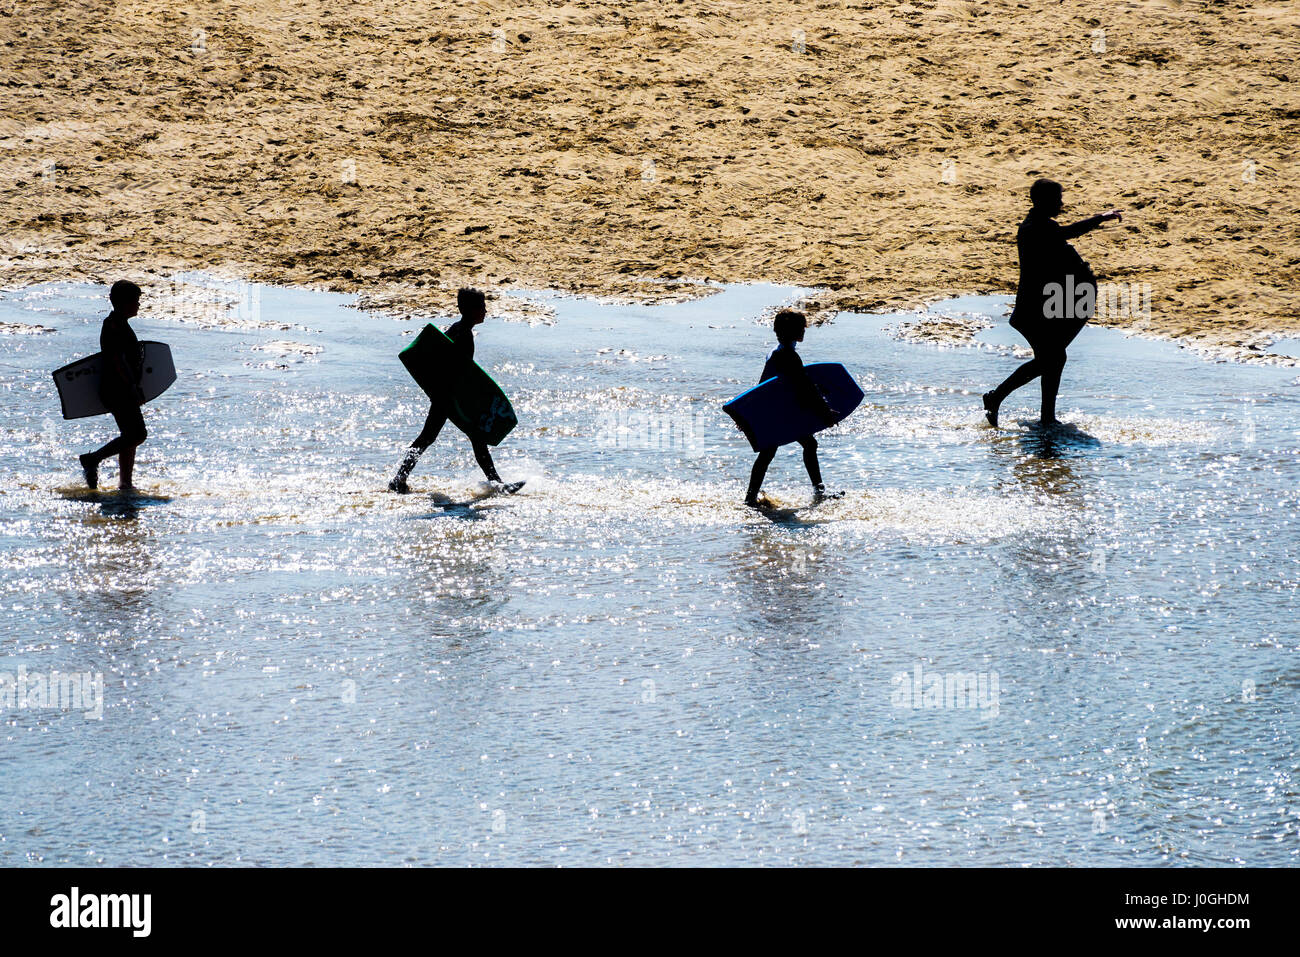 Seaside Crantock Beach Father Children Silhouettes Silhouetted Bodyboards Walking Sea Sand Holidaymakers People Figures Leading Shore Stock Photo